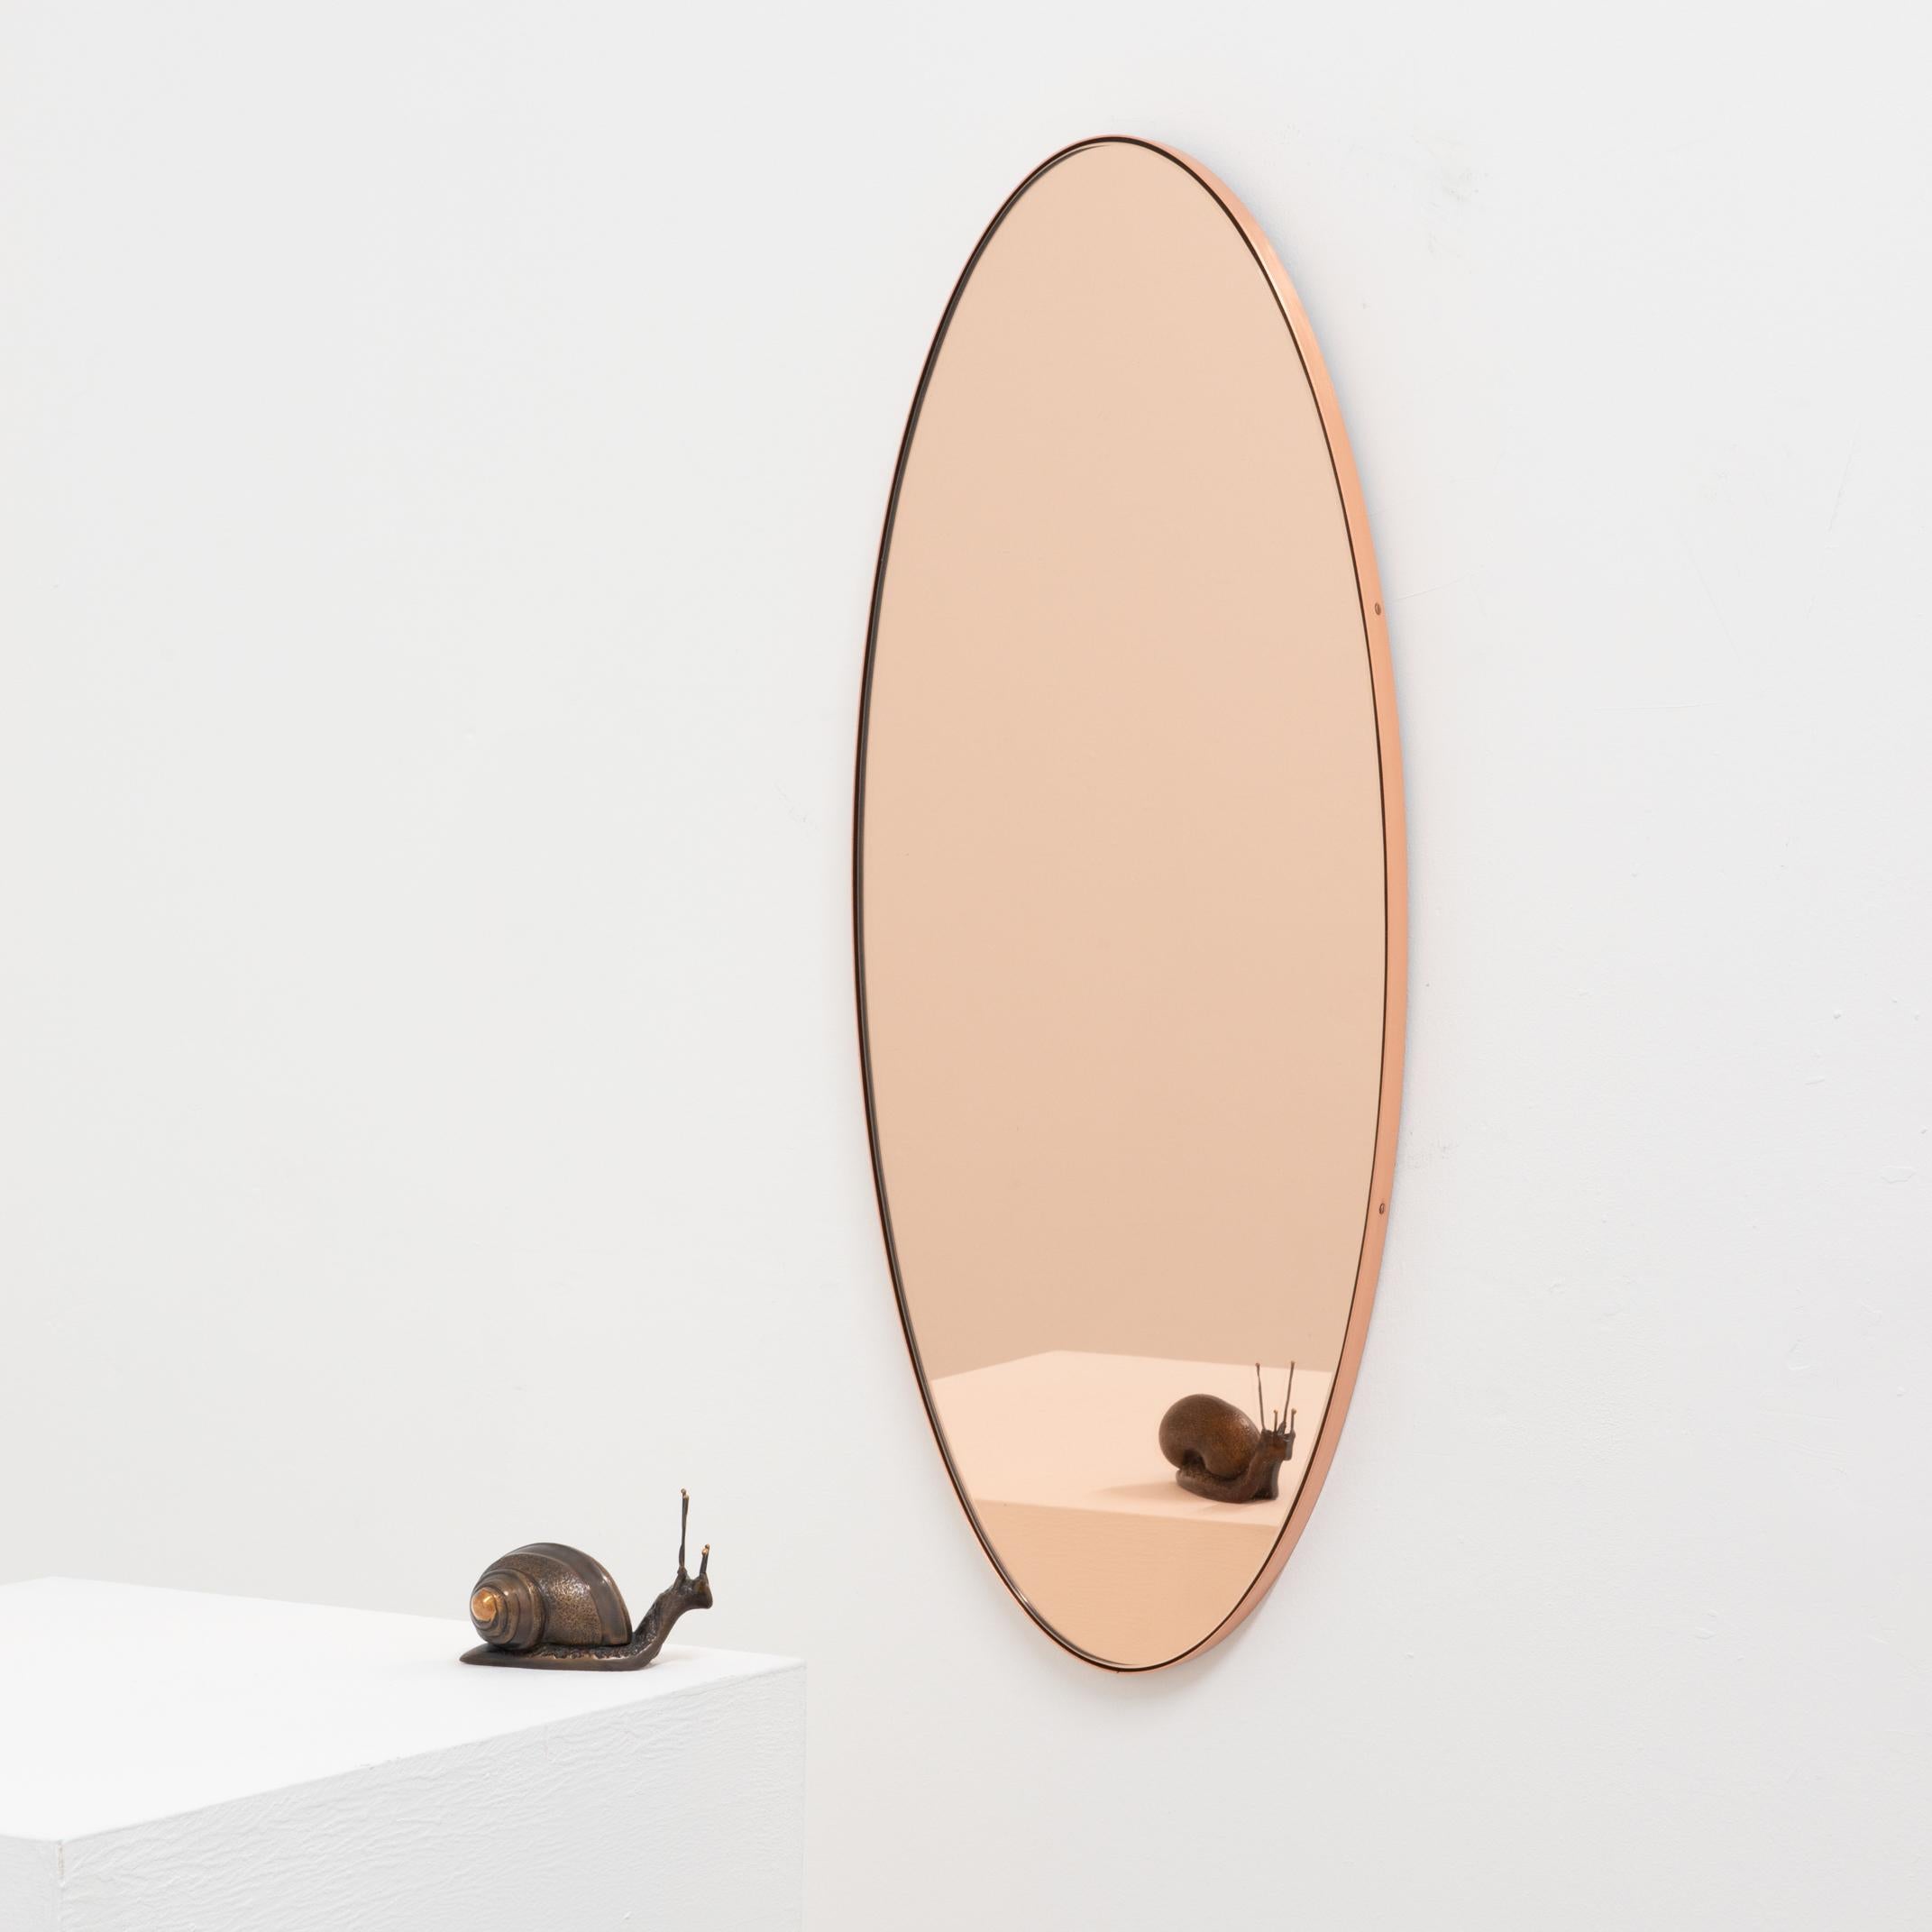 British Ovalis Oval shaped Rose Gold Contemporary Mirror with a Copper Frame, Medium For Sale